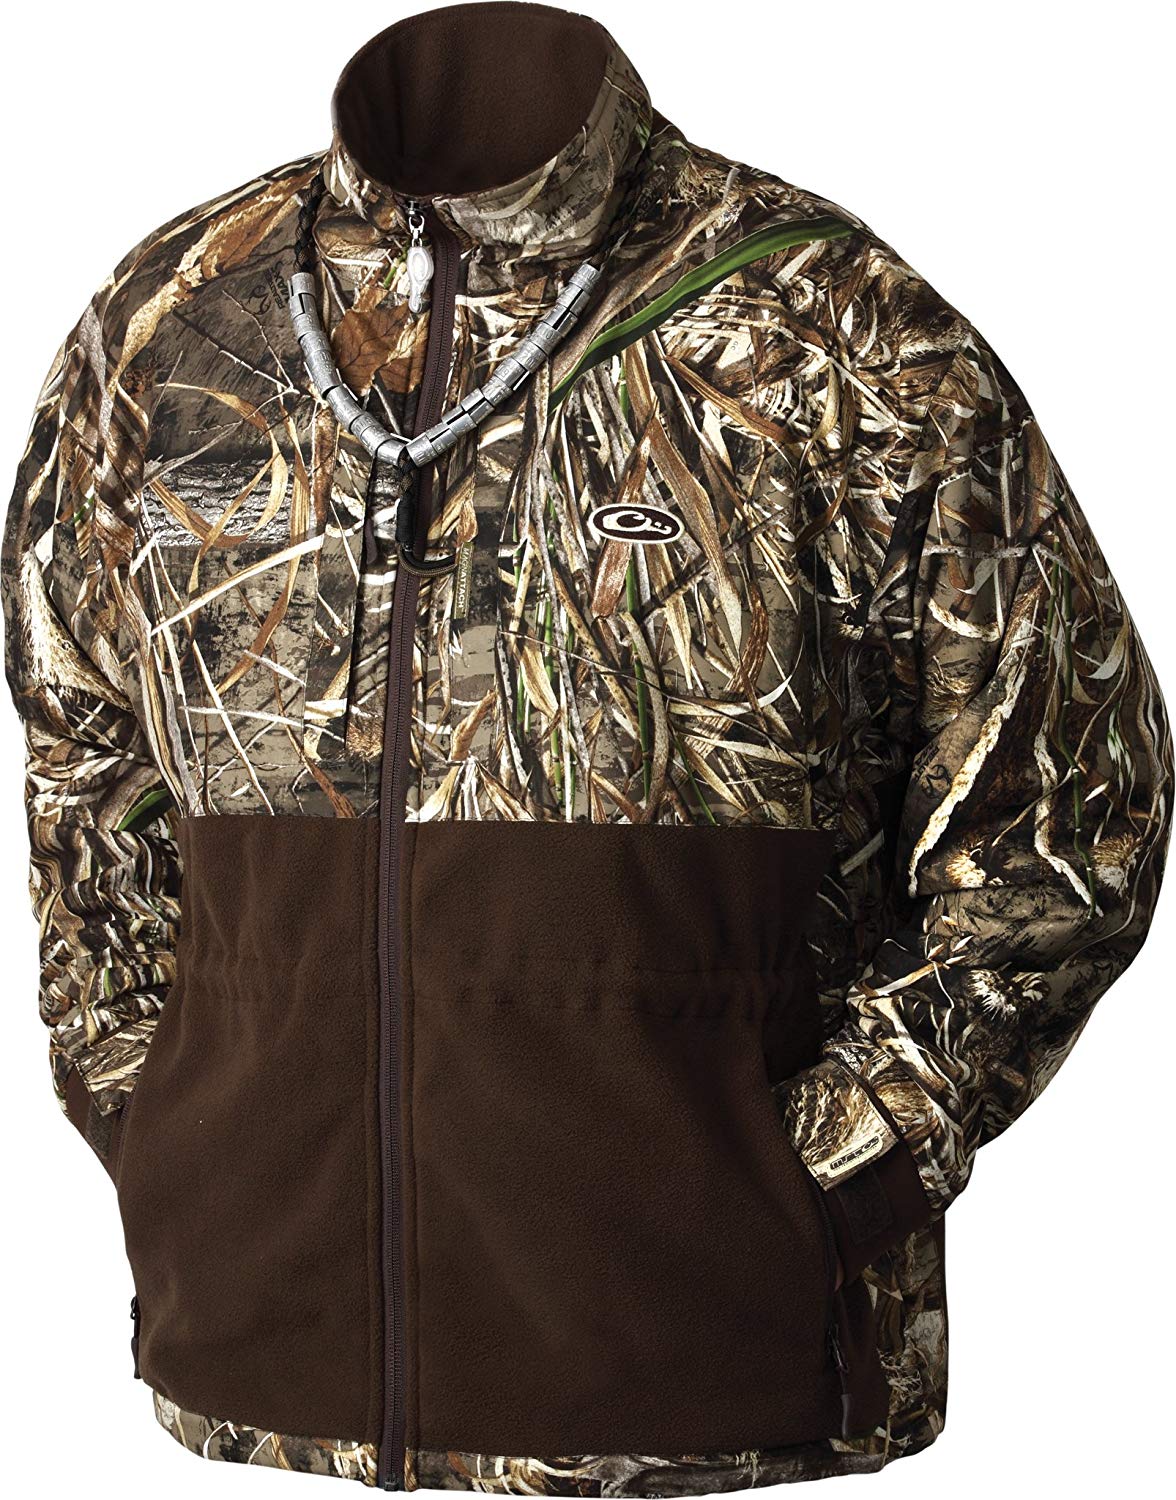 buy hunting jackets at cheap rate in bulk. wholesale & retail camping tools & essentials store.